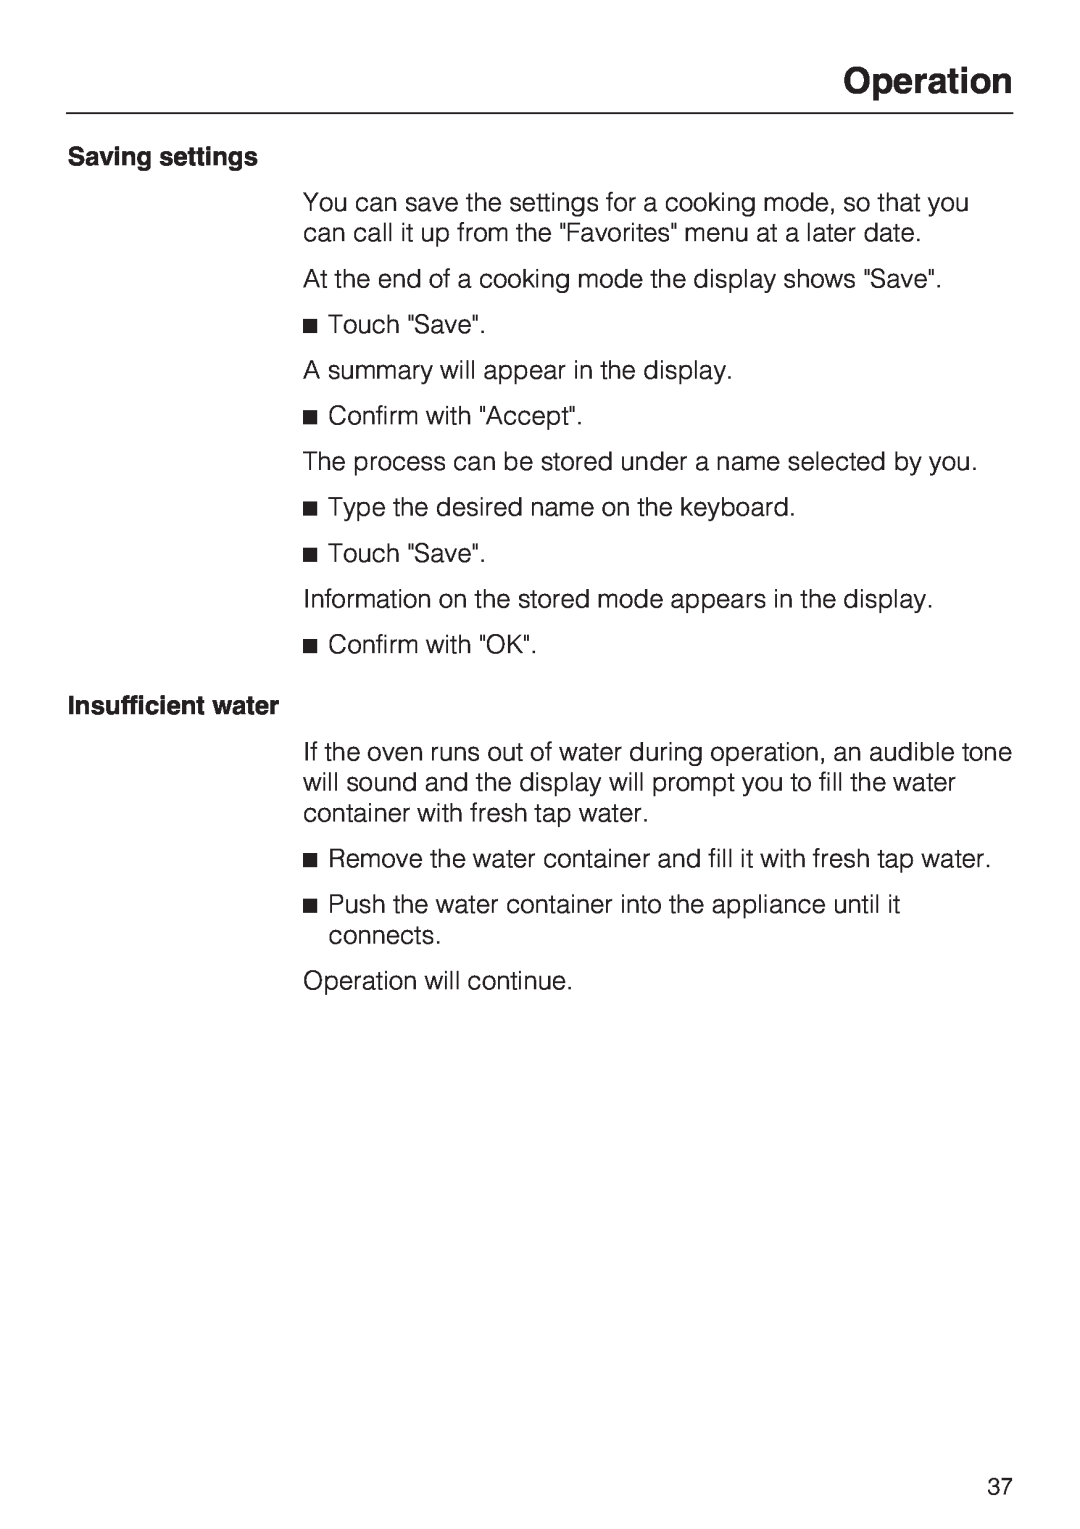 Miele 09 855 050 installation instructions Operation, Saving settings, Insufficient water 